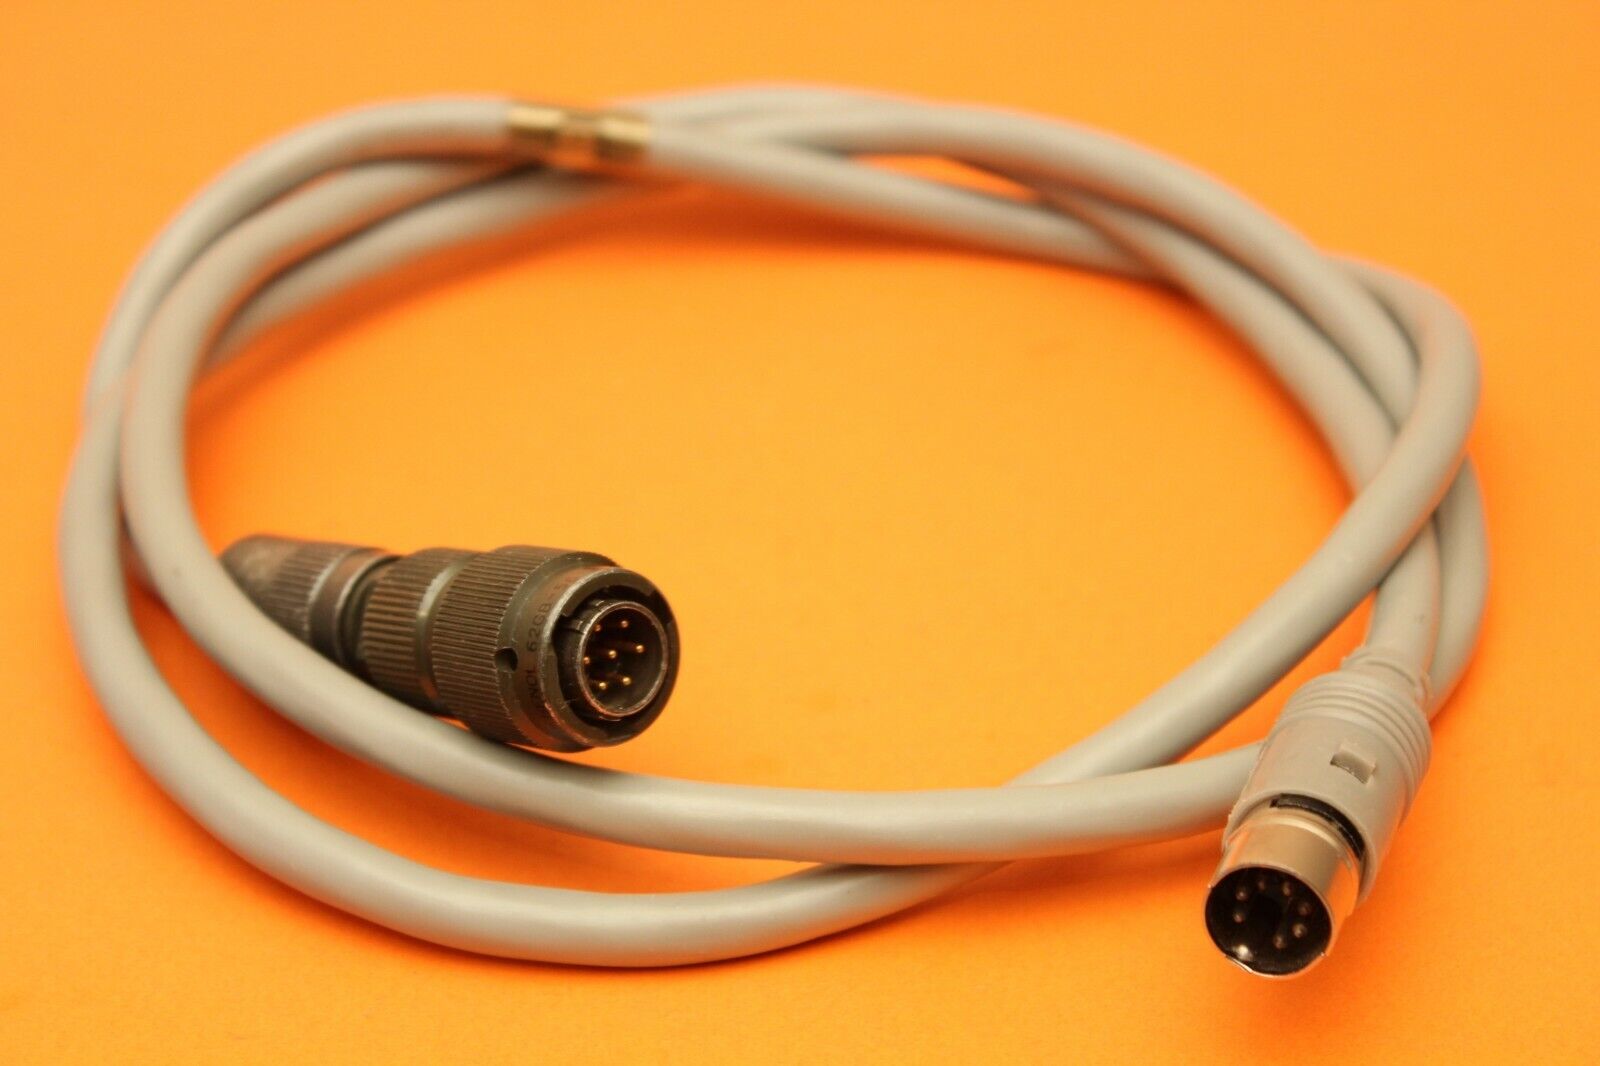 CABLE FOR VARIOUS RACAL SCRAMBLER ENCRYPTION UNIT MEROD TDED TO US / NATO RADIOS